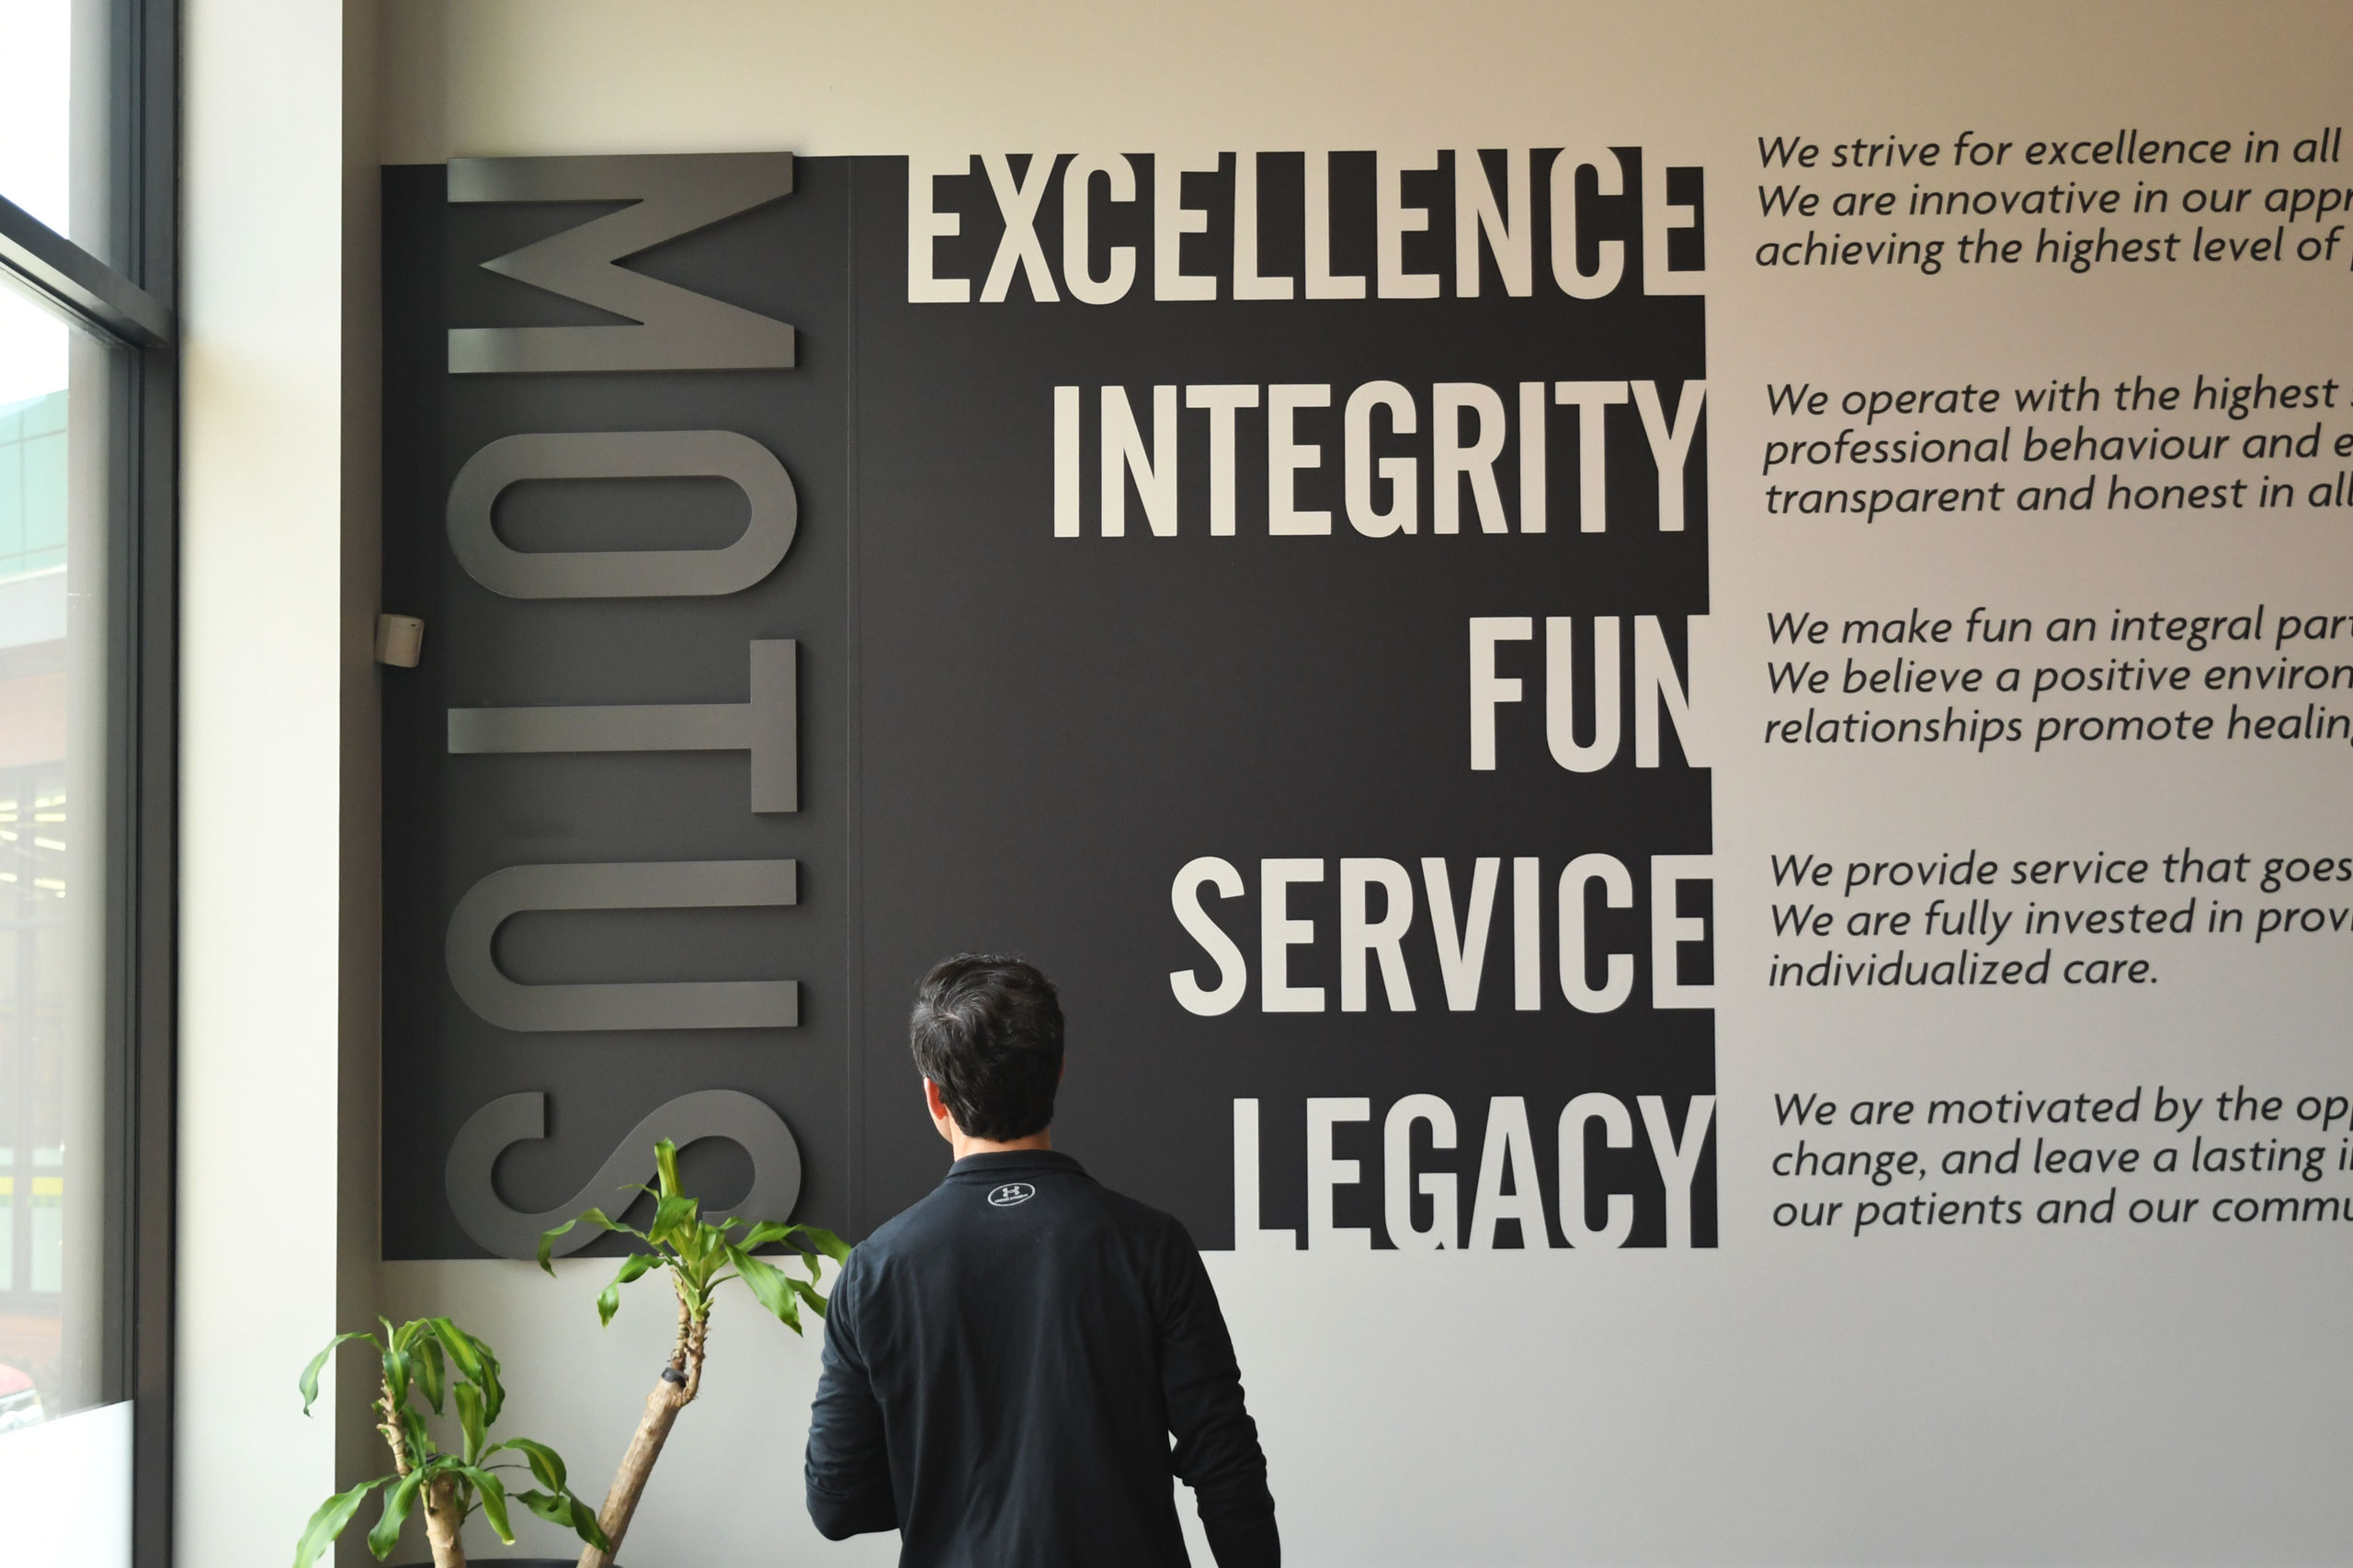 Excellence Integrity Fun Service Legacy